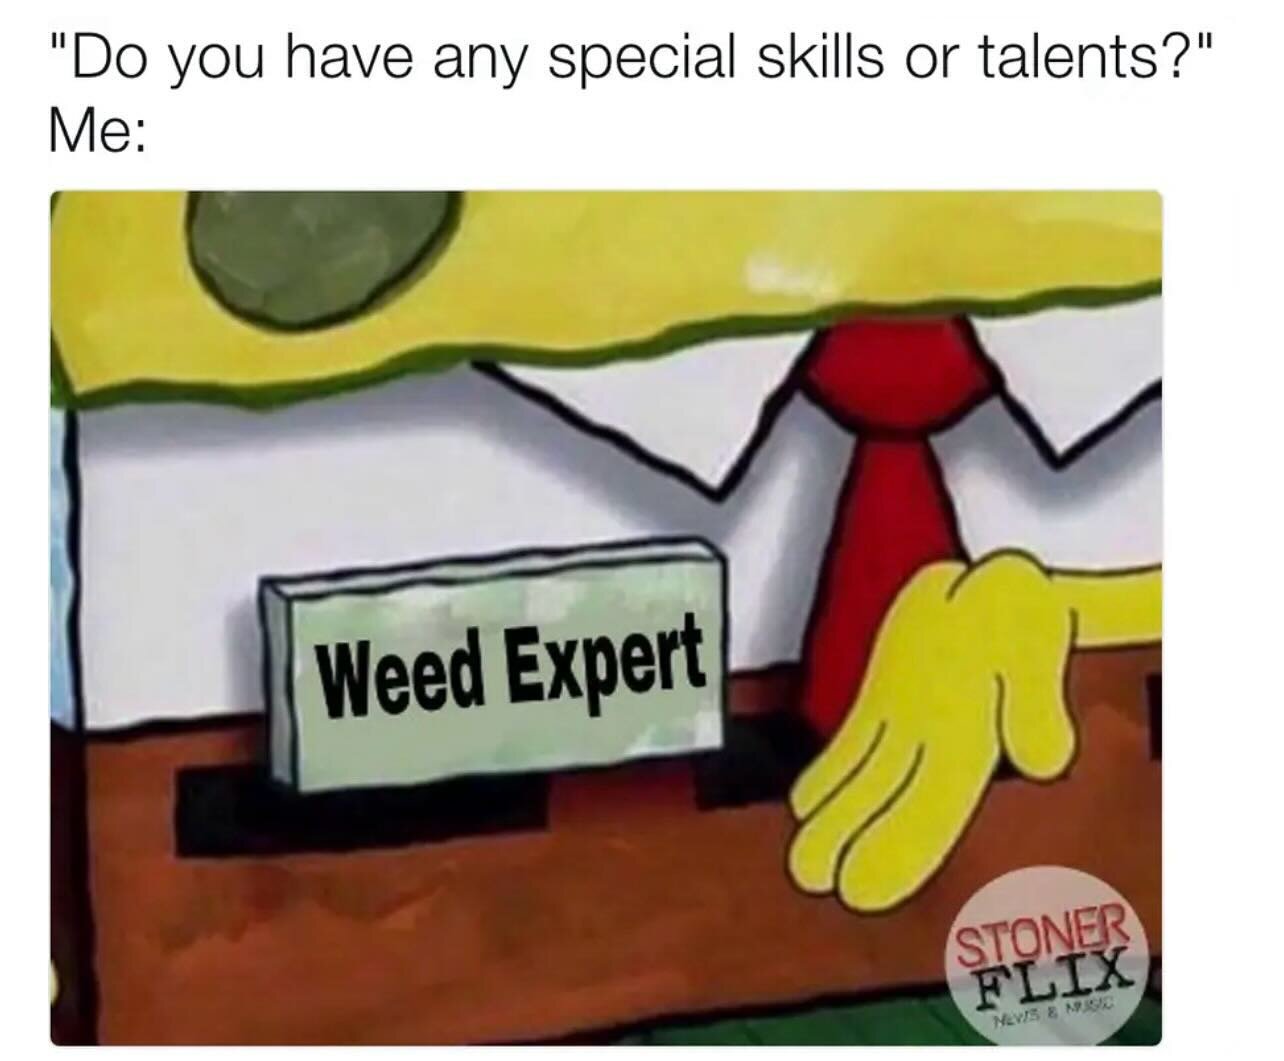 Tag someone with this special skill🌳
.
.
.
.
#specialskill #weedexpert #weedmeme #discodabs